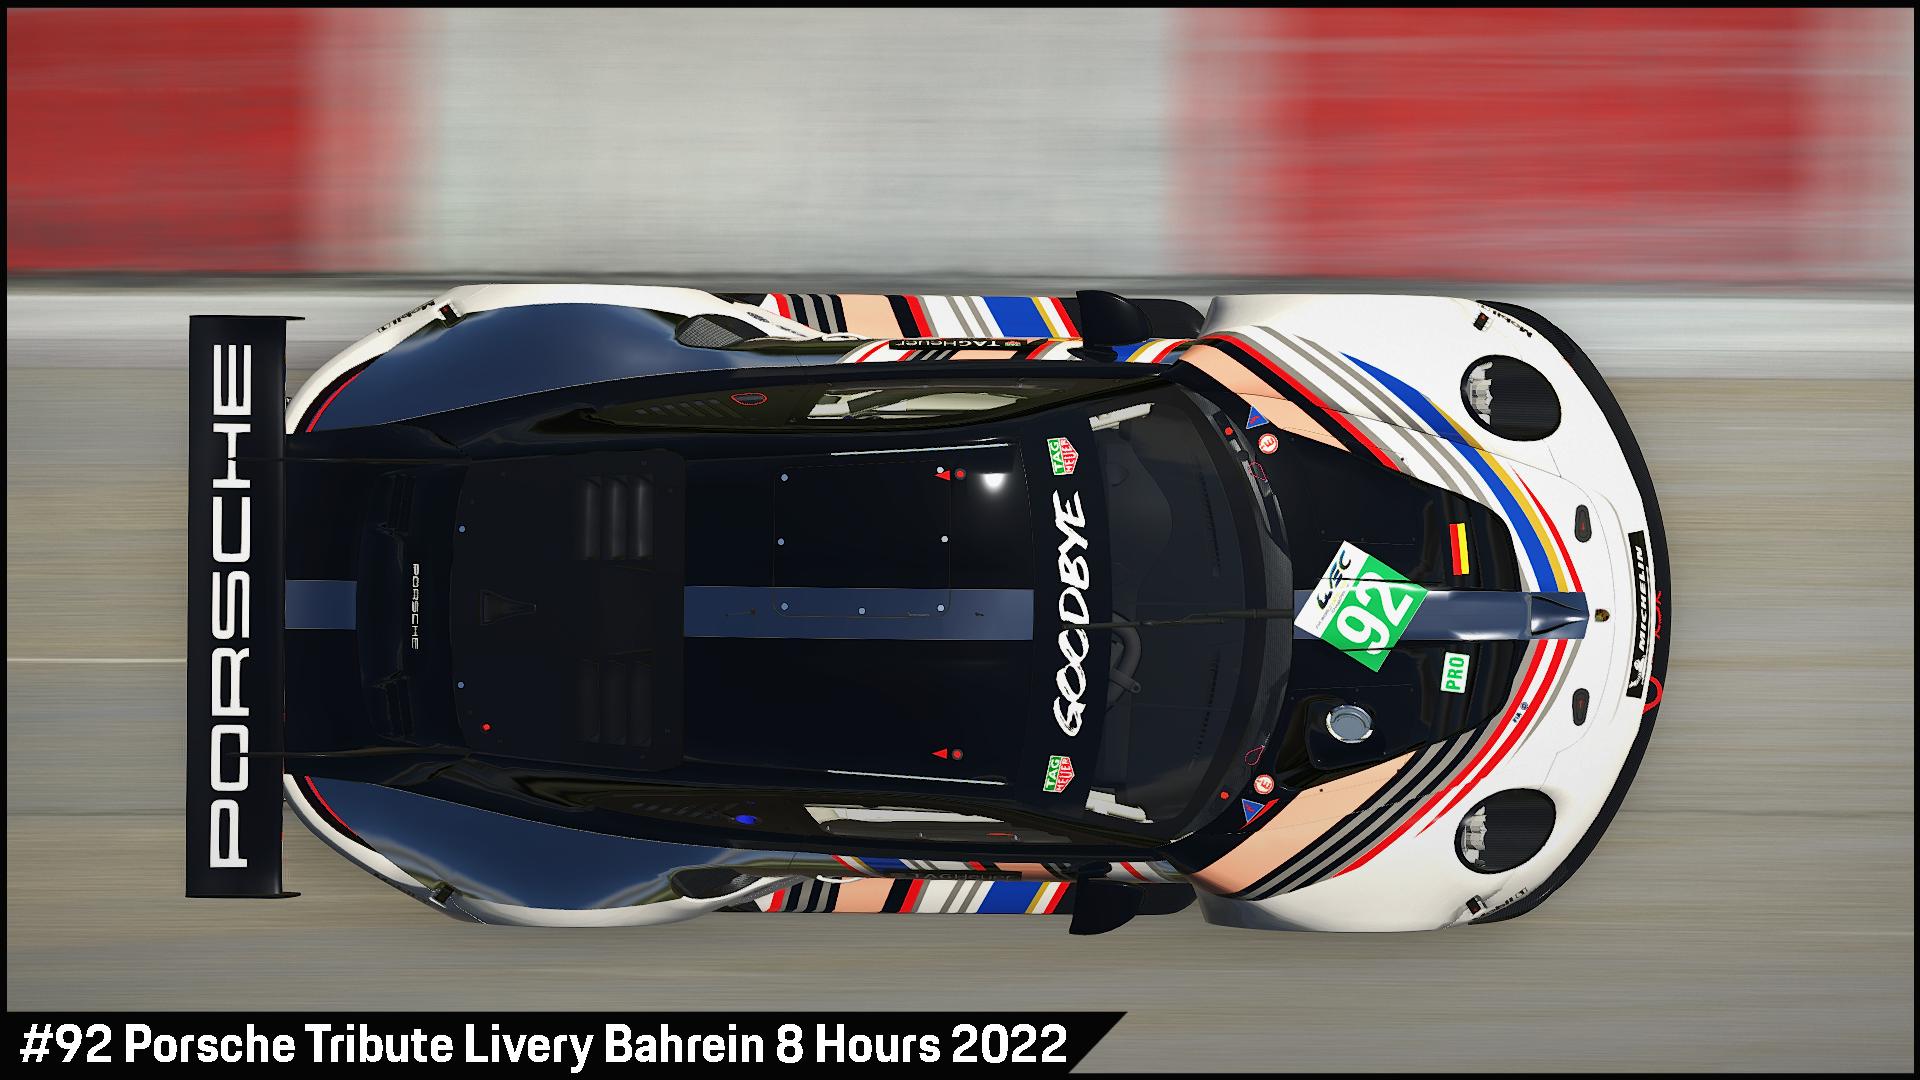 Preview of #92 Porsche Tribute Livery Bahrein 8 Hours 2022 by Sergio Hernando